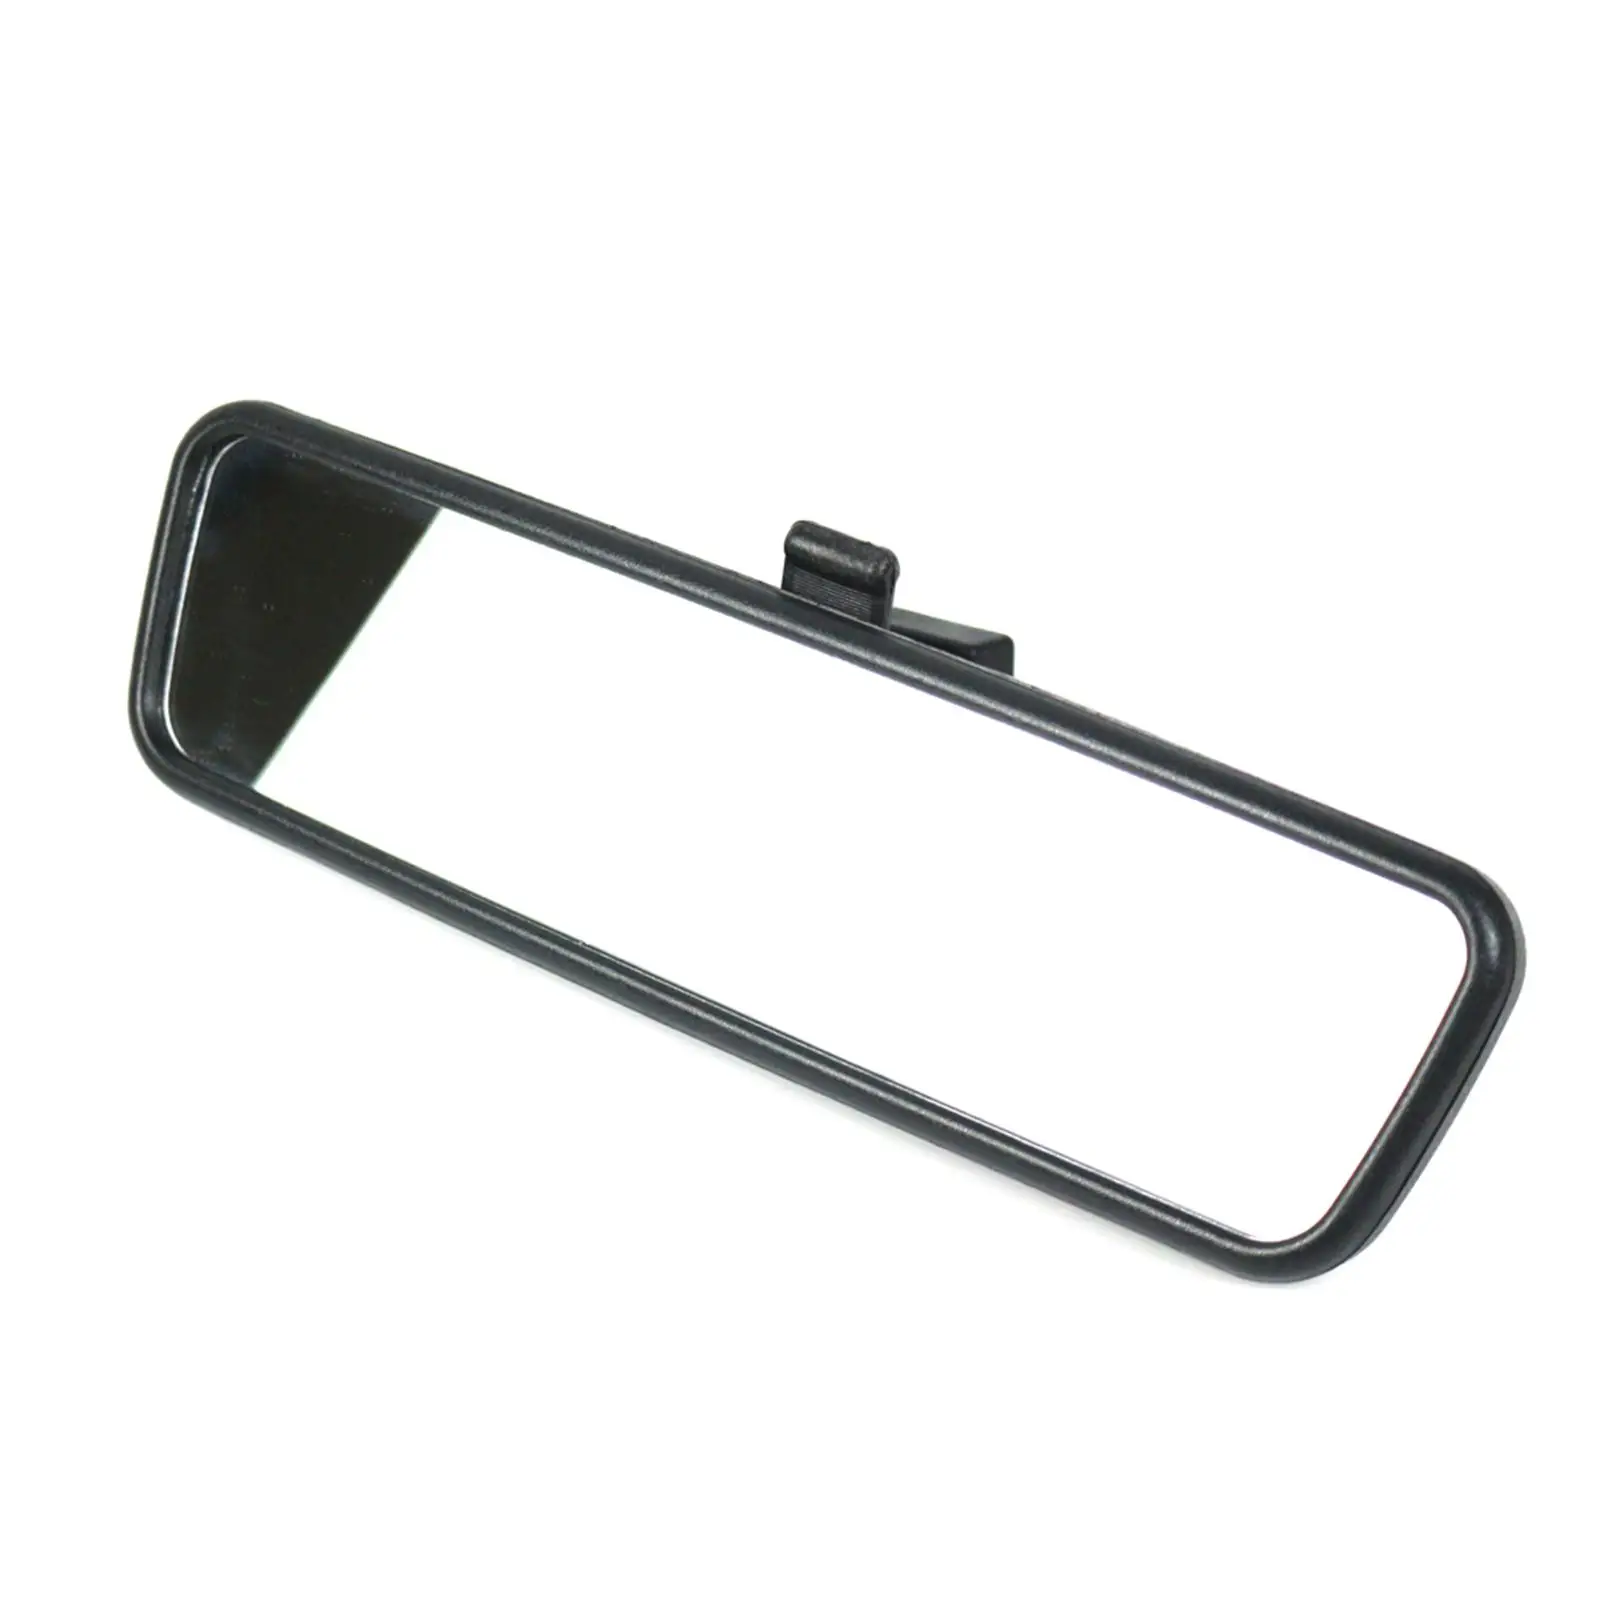 Interior Rear View Mirror 814842 Rearview Mirror for Peugeot 107 Car Accessory Direct Replaces Easy to Install